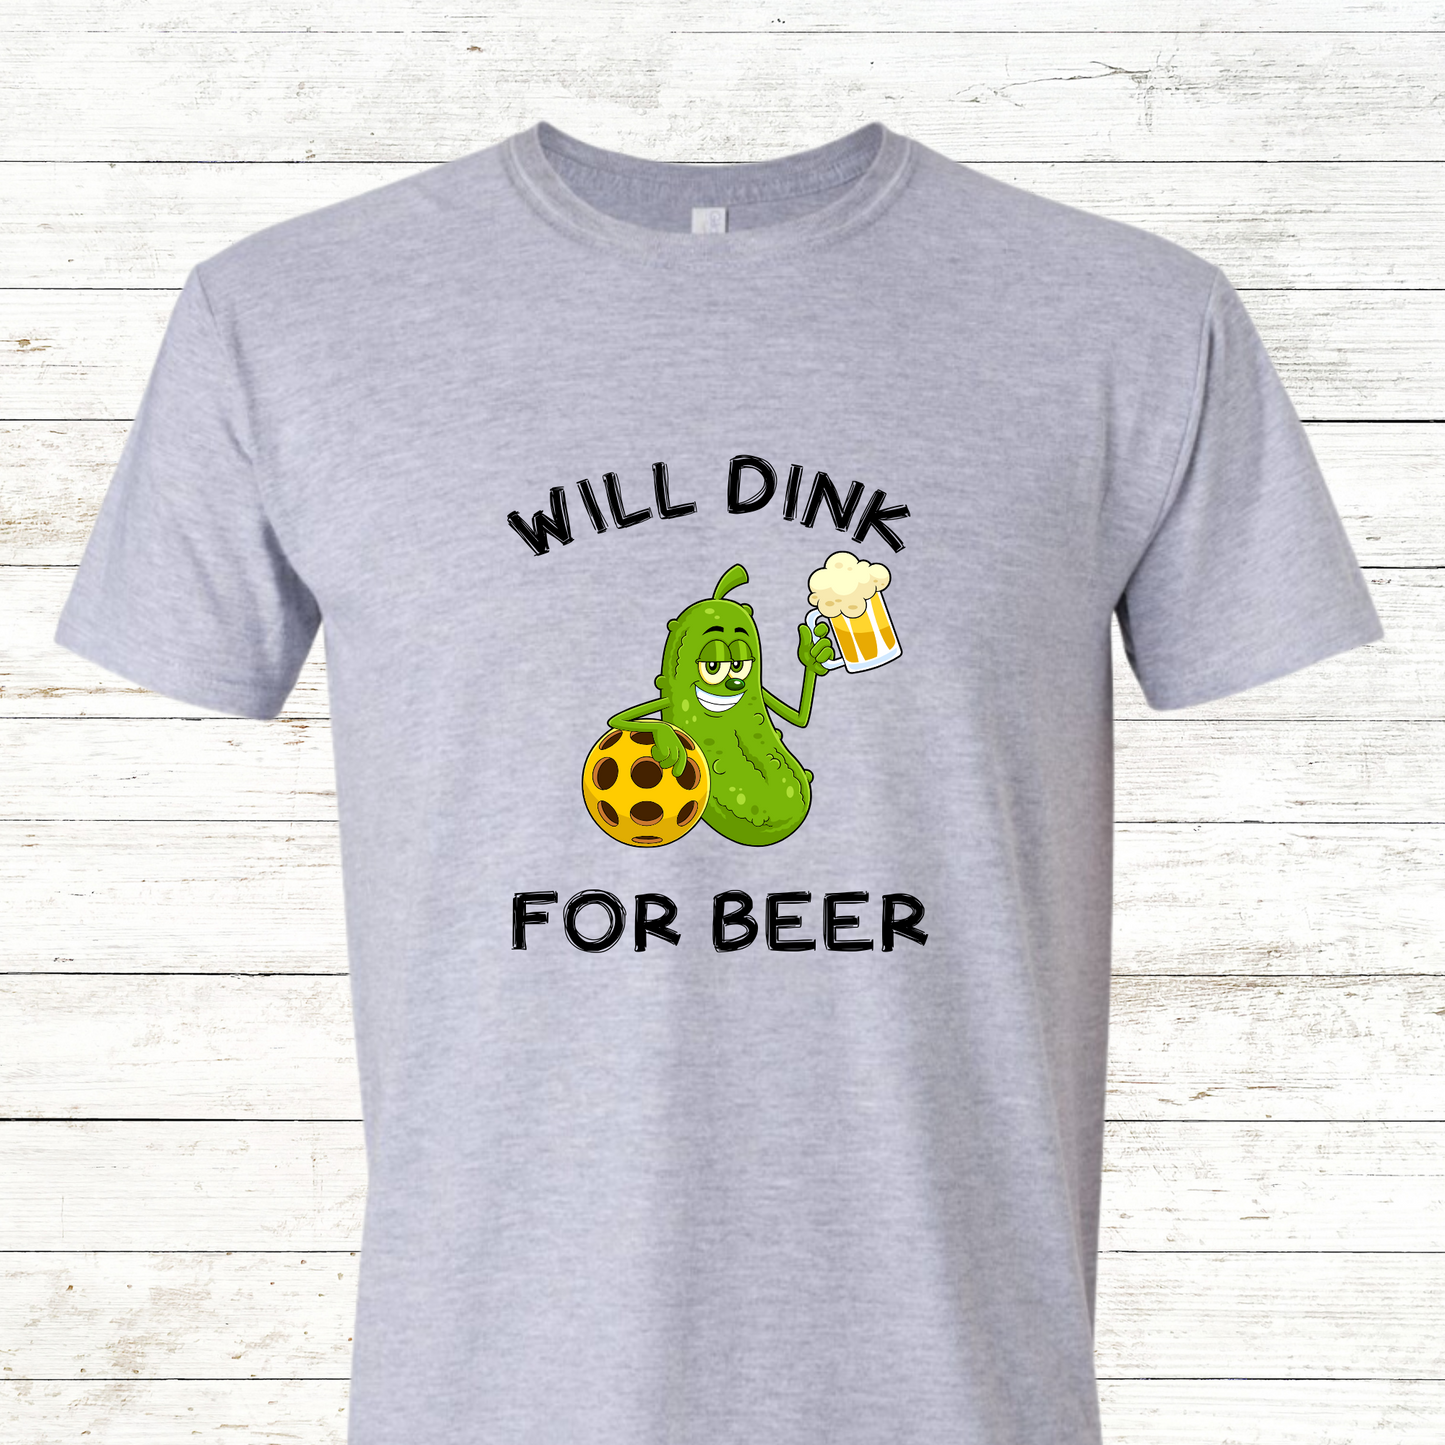 Will Dink for Beer